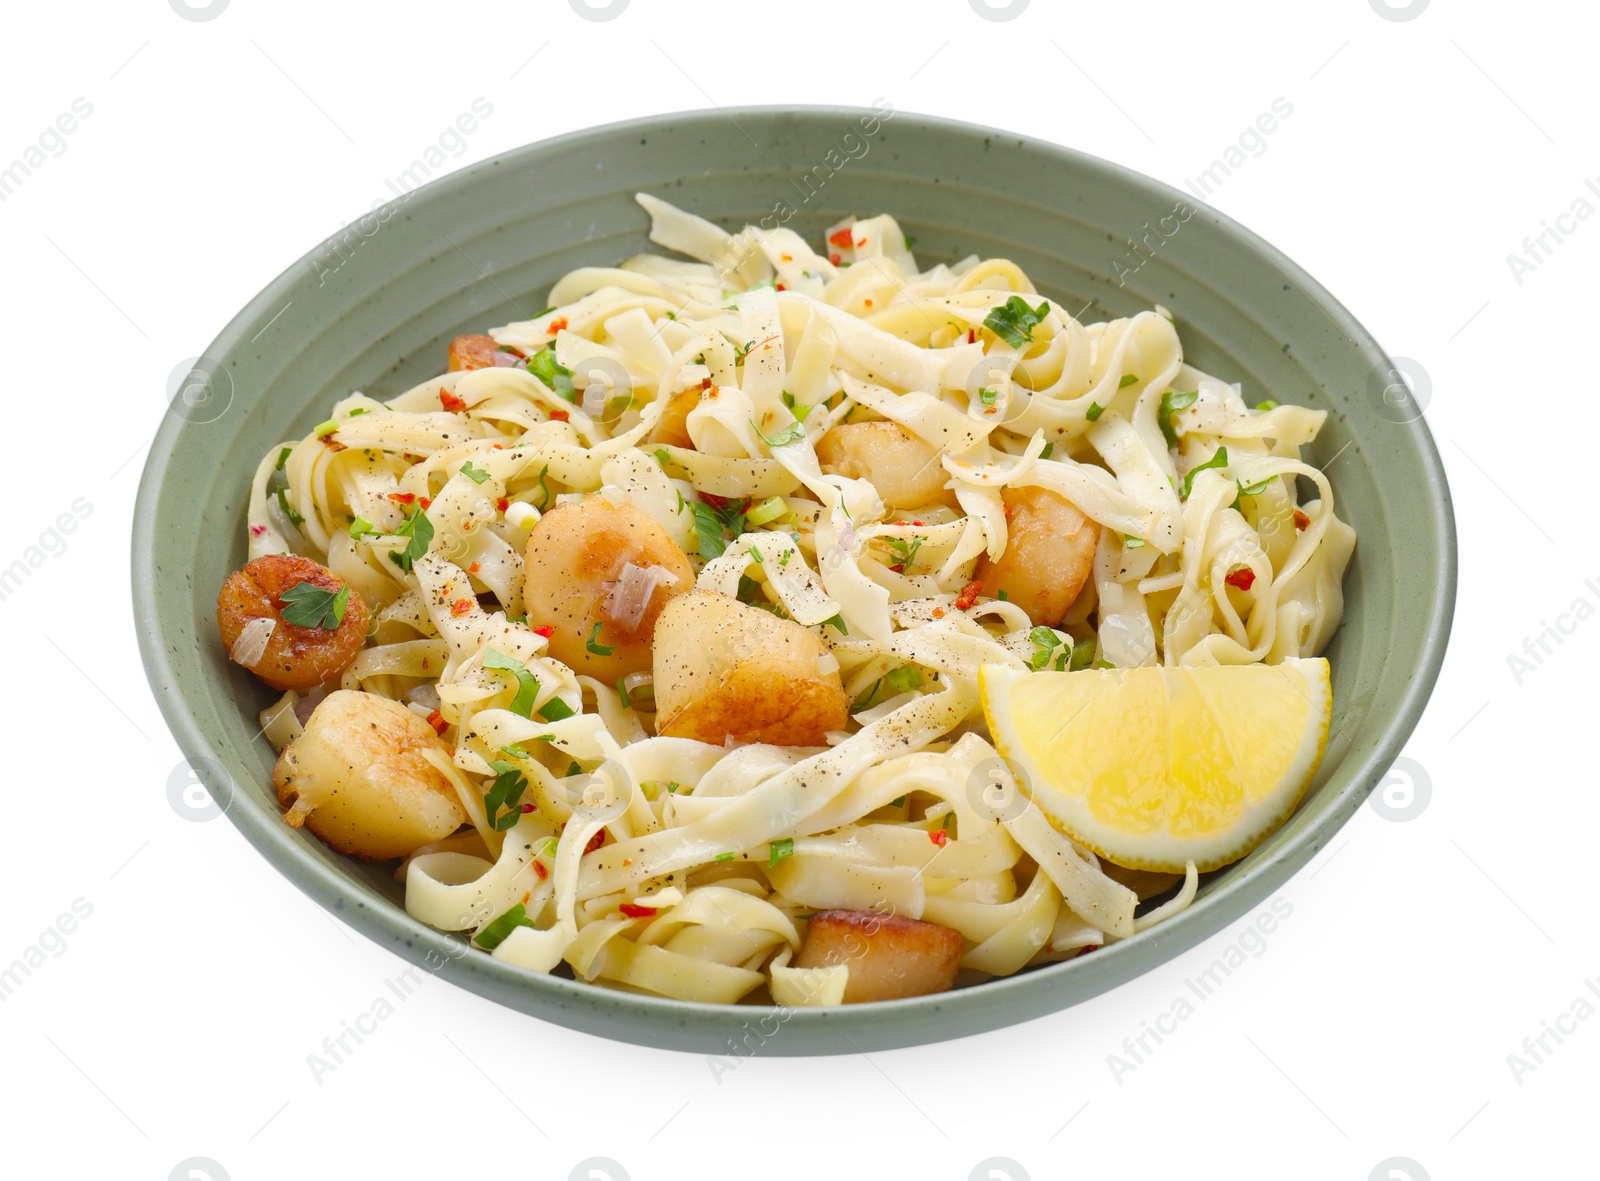 Photo of Delicious scallop pasta with spices and lemon in bowl isolated on white